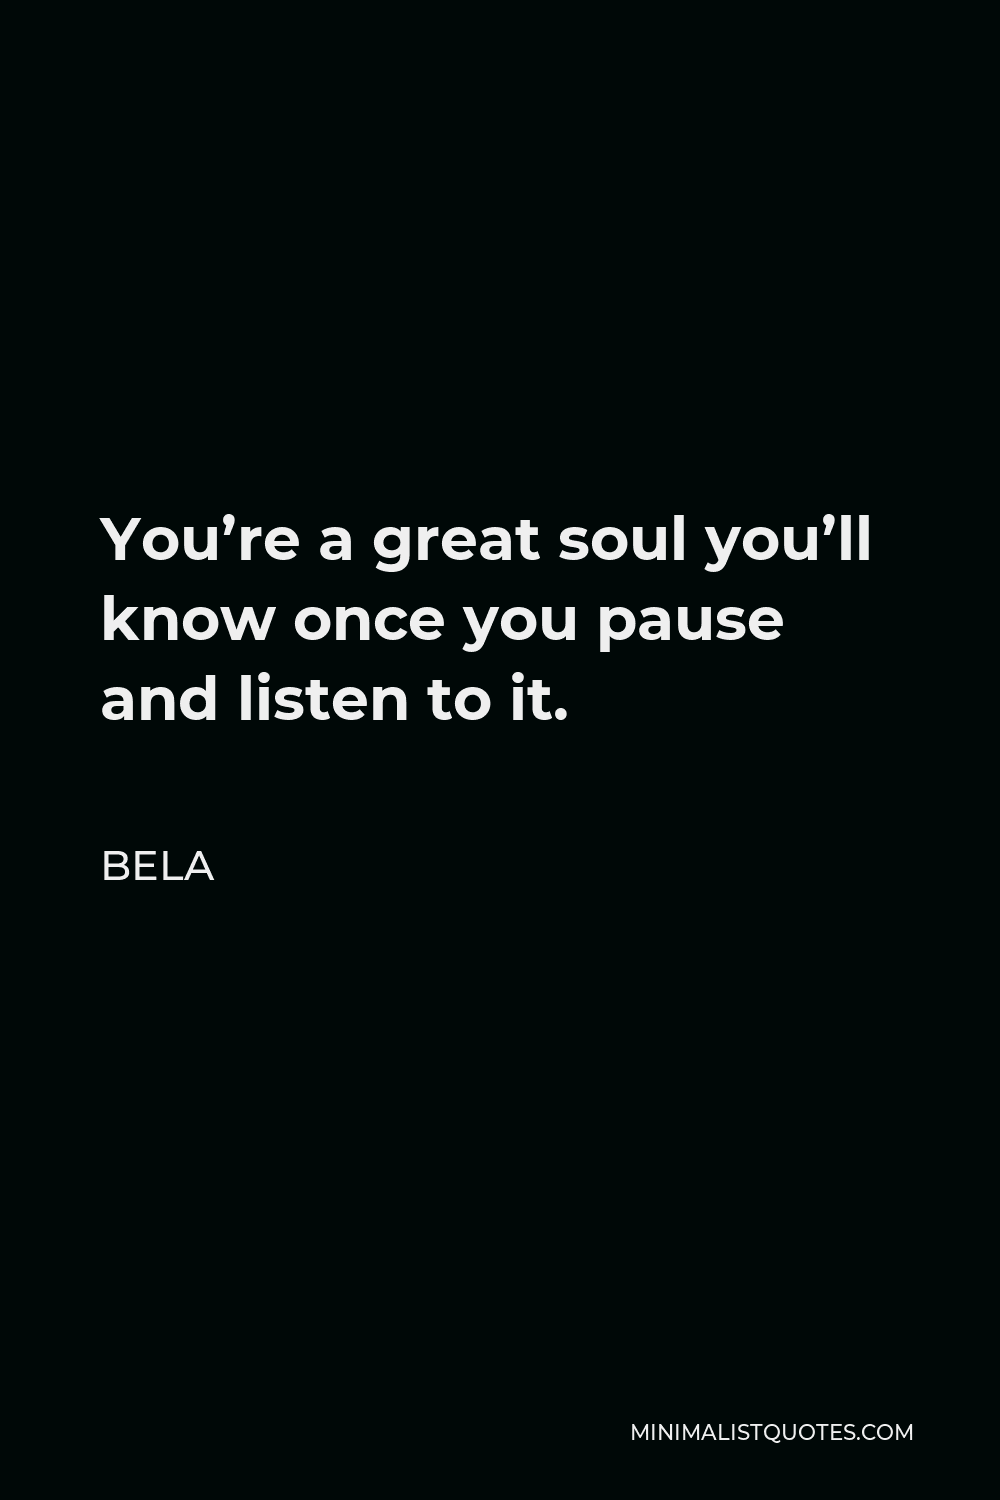 Bela Quote - You’re a great soul you’ll know once you pause and listen to it.